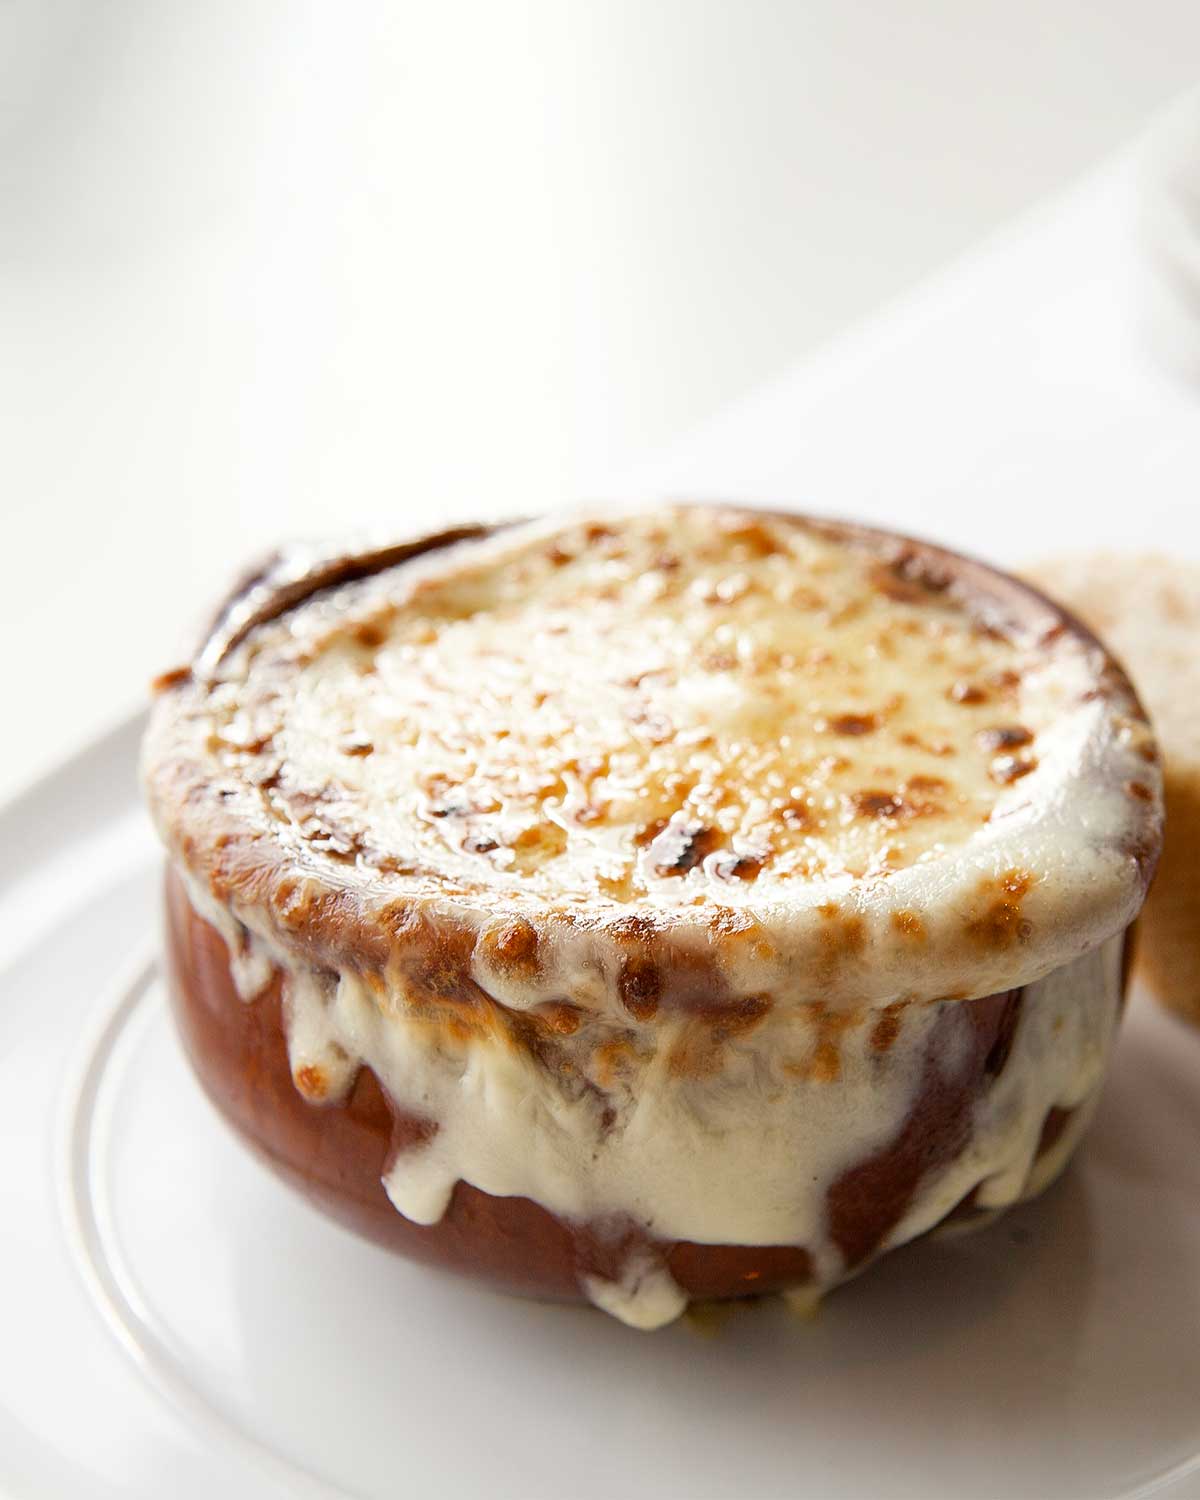 A ceramic soup bowl filled with French onion soup, and topped with melted cheese which is dripping down the side of the bowl.